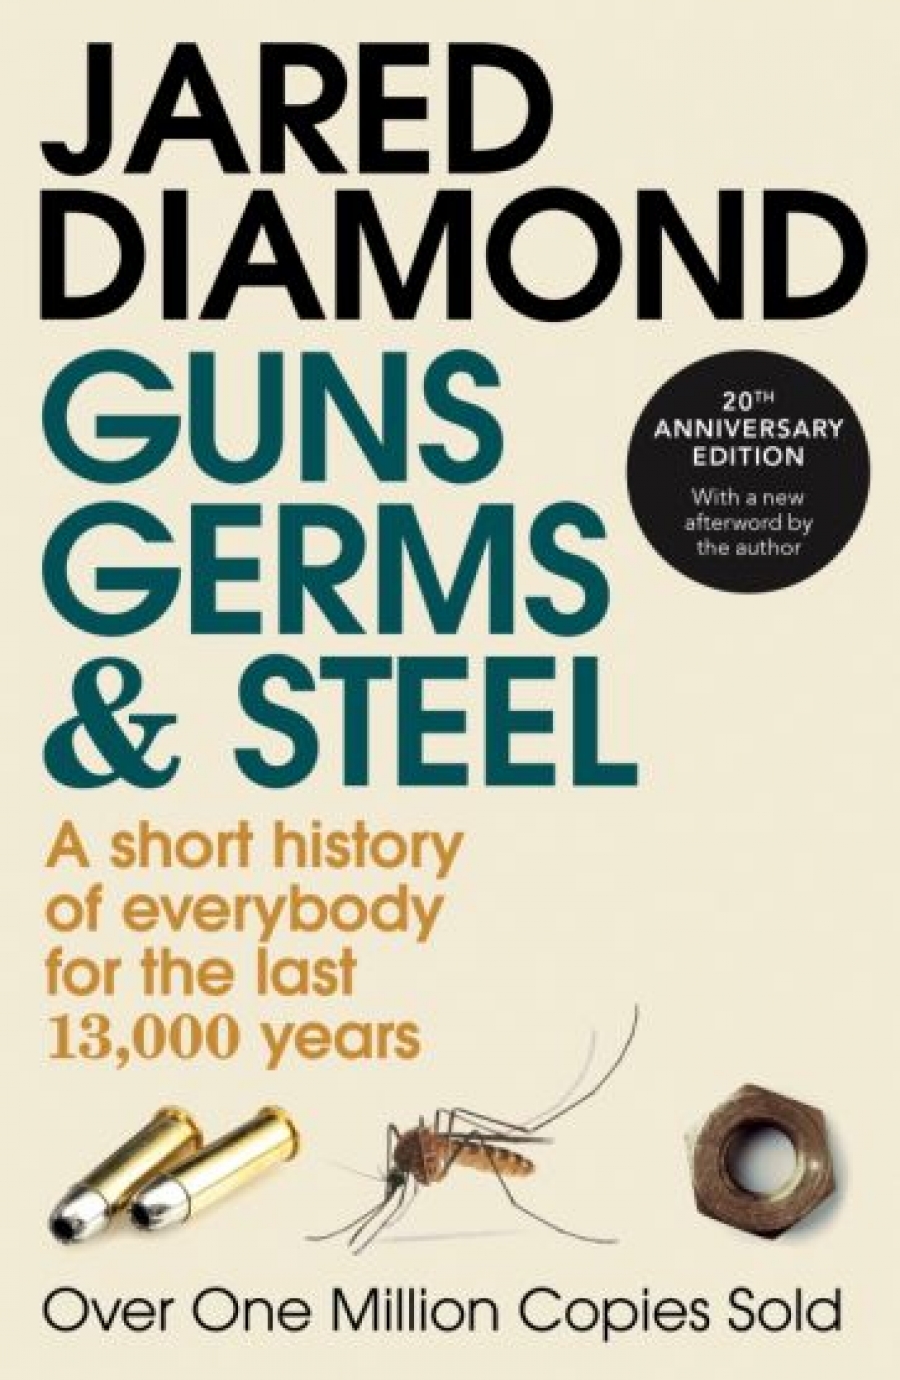 Diamond, Jared Guns, Germs and Steel: Short History of Everybody for Last 13,000 Years 